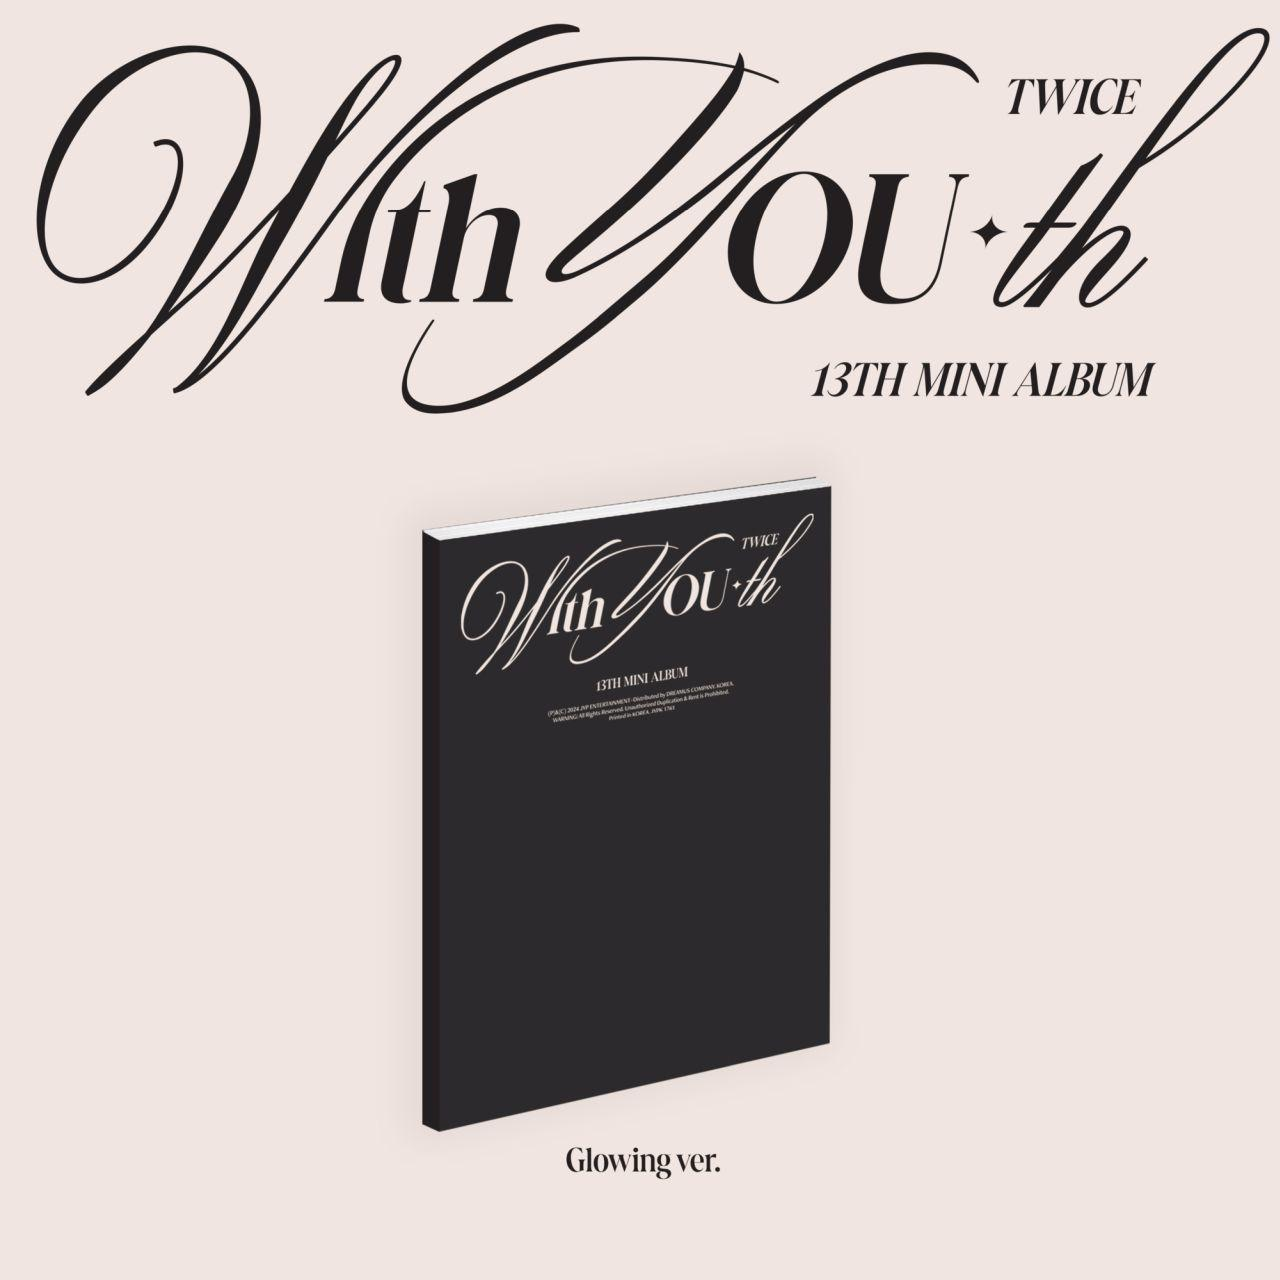 Twice - With You-TH - (Glowing (CD) Ver.)